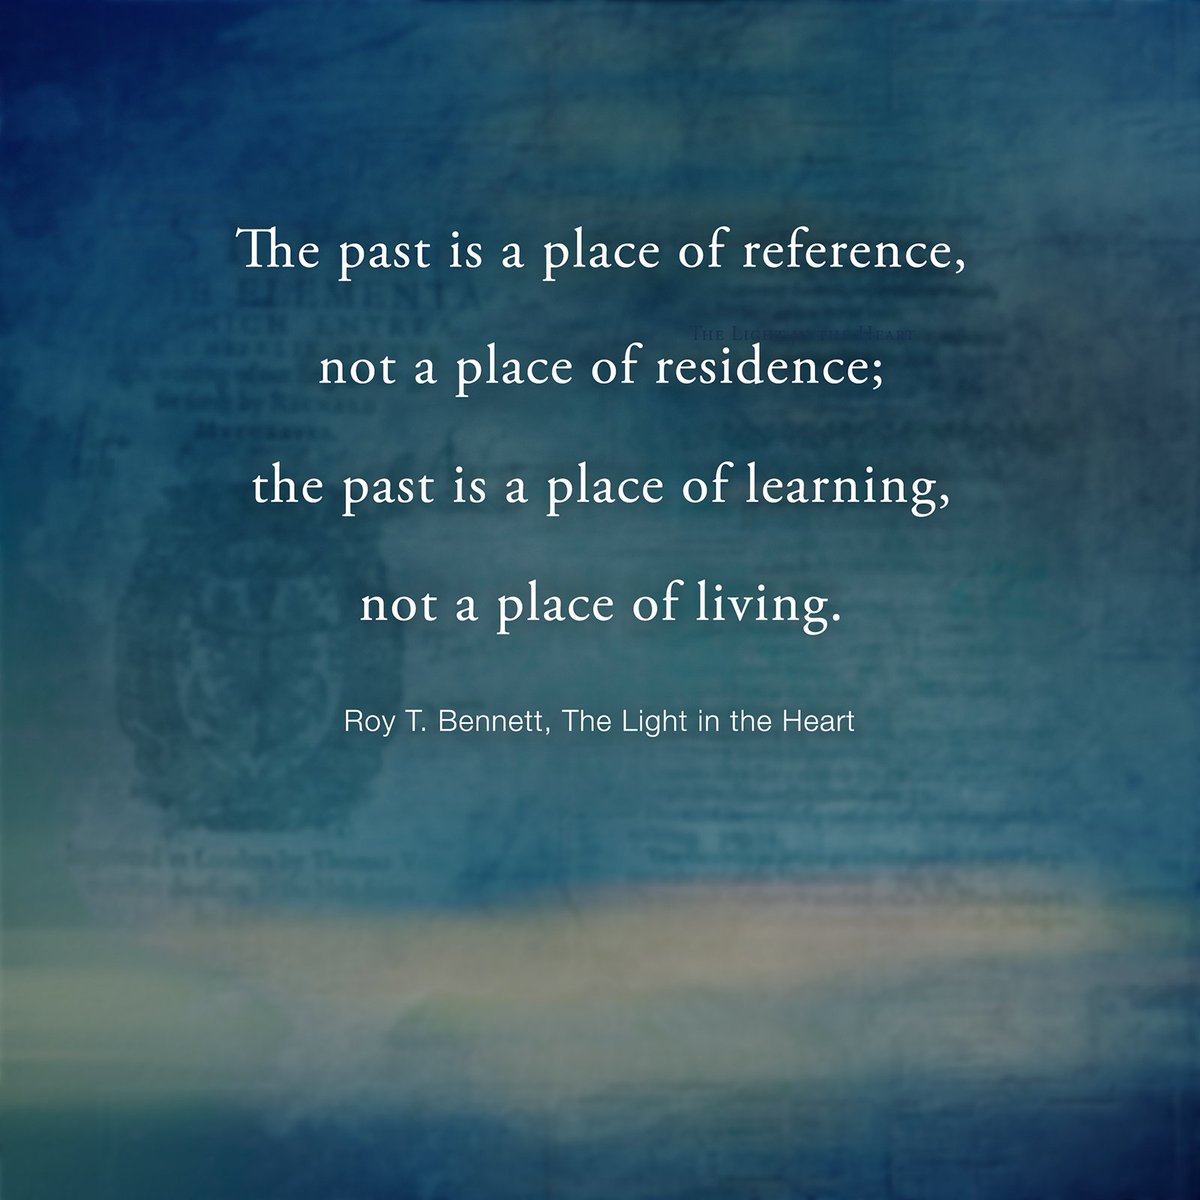 Reminder
The past is a place of reference, not a place of residence; the past is a place of learning, not a place of living.
Roy T. Bennett, The Light in the Heart
#motivation #Inspiration #quote #quotes #RoyTBennett